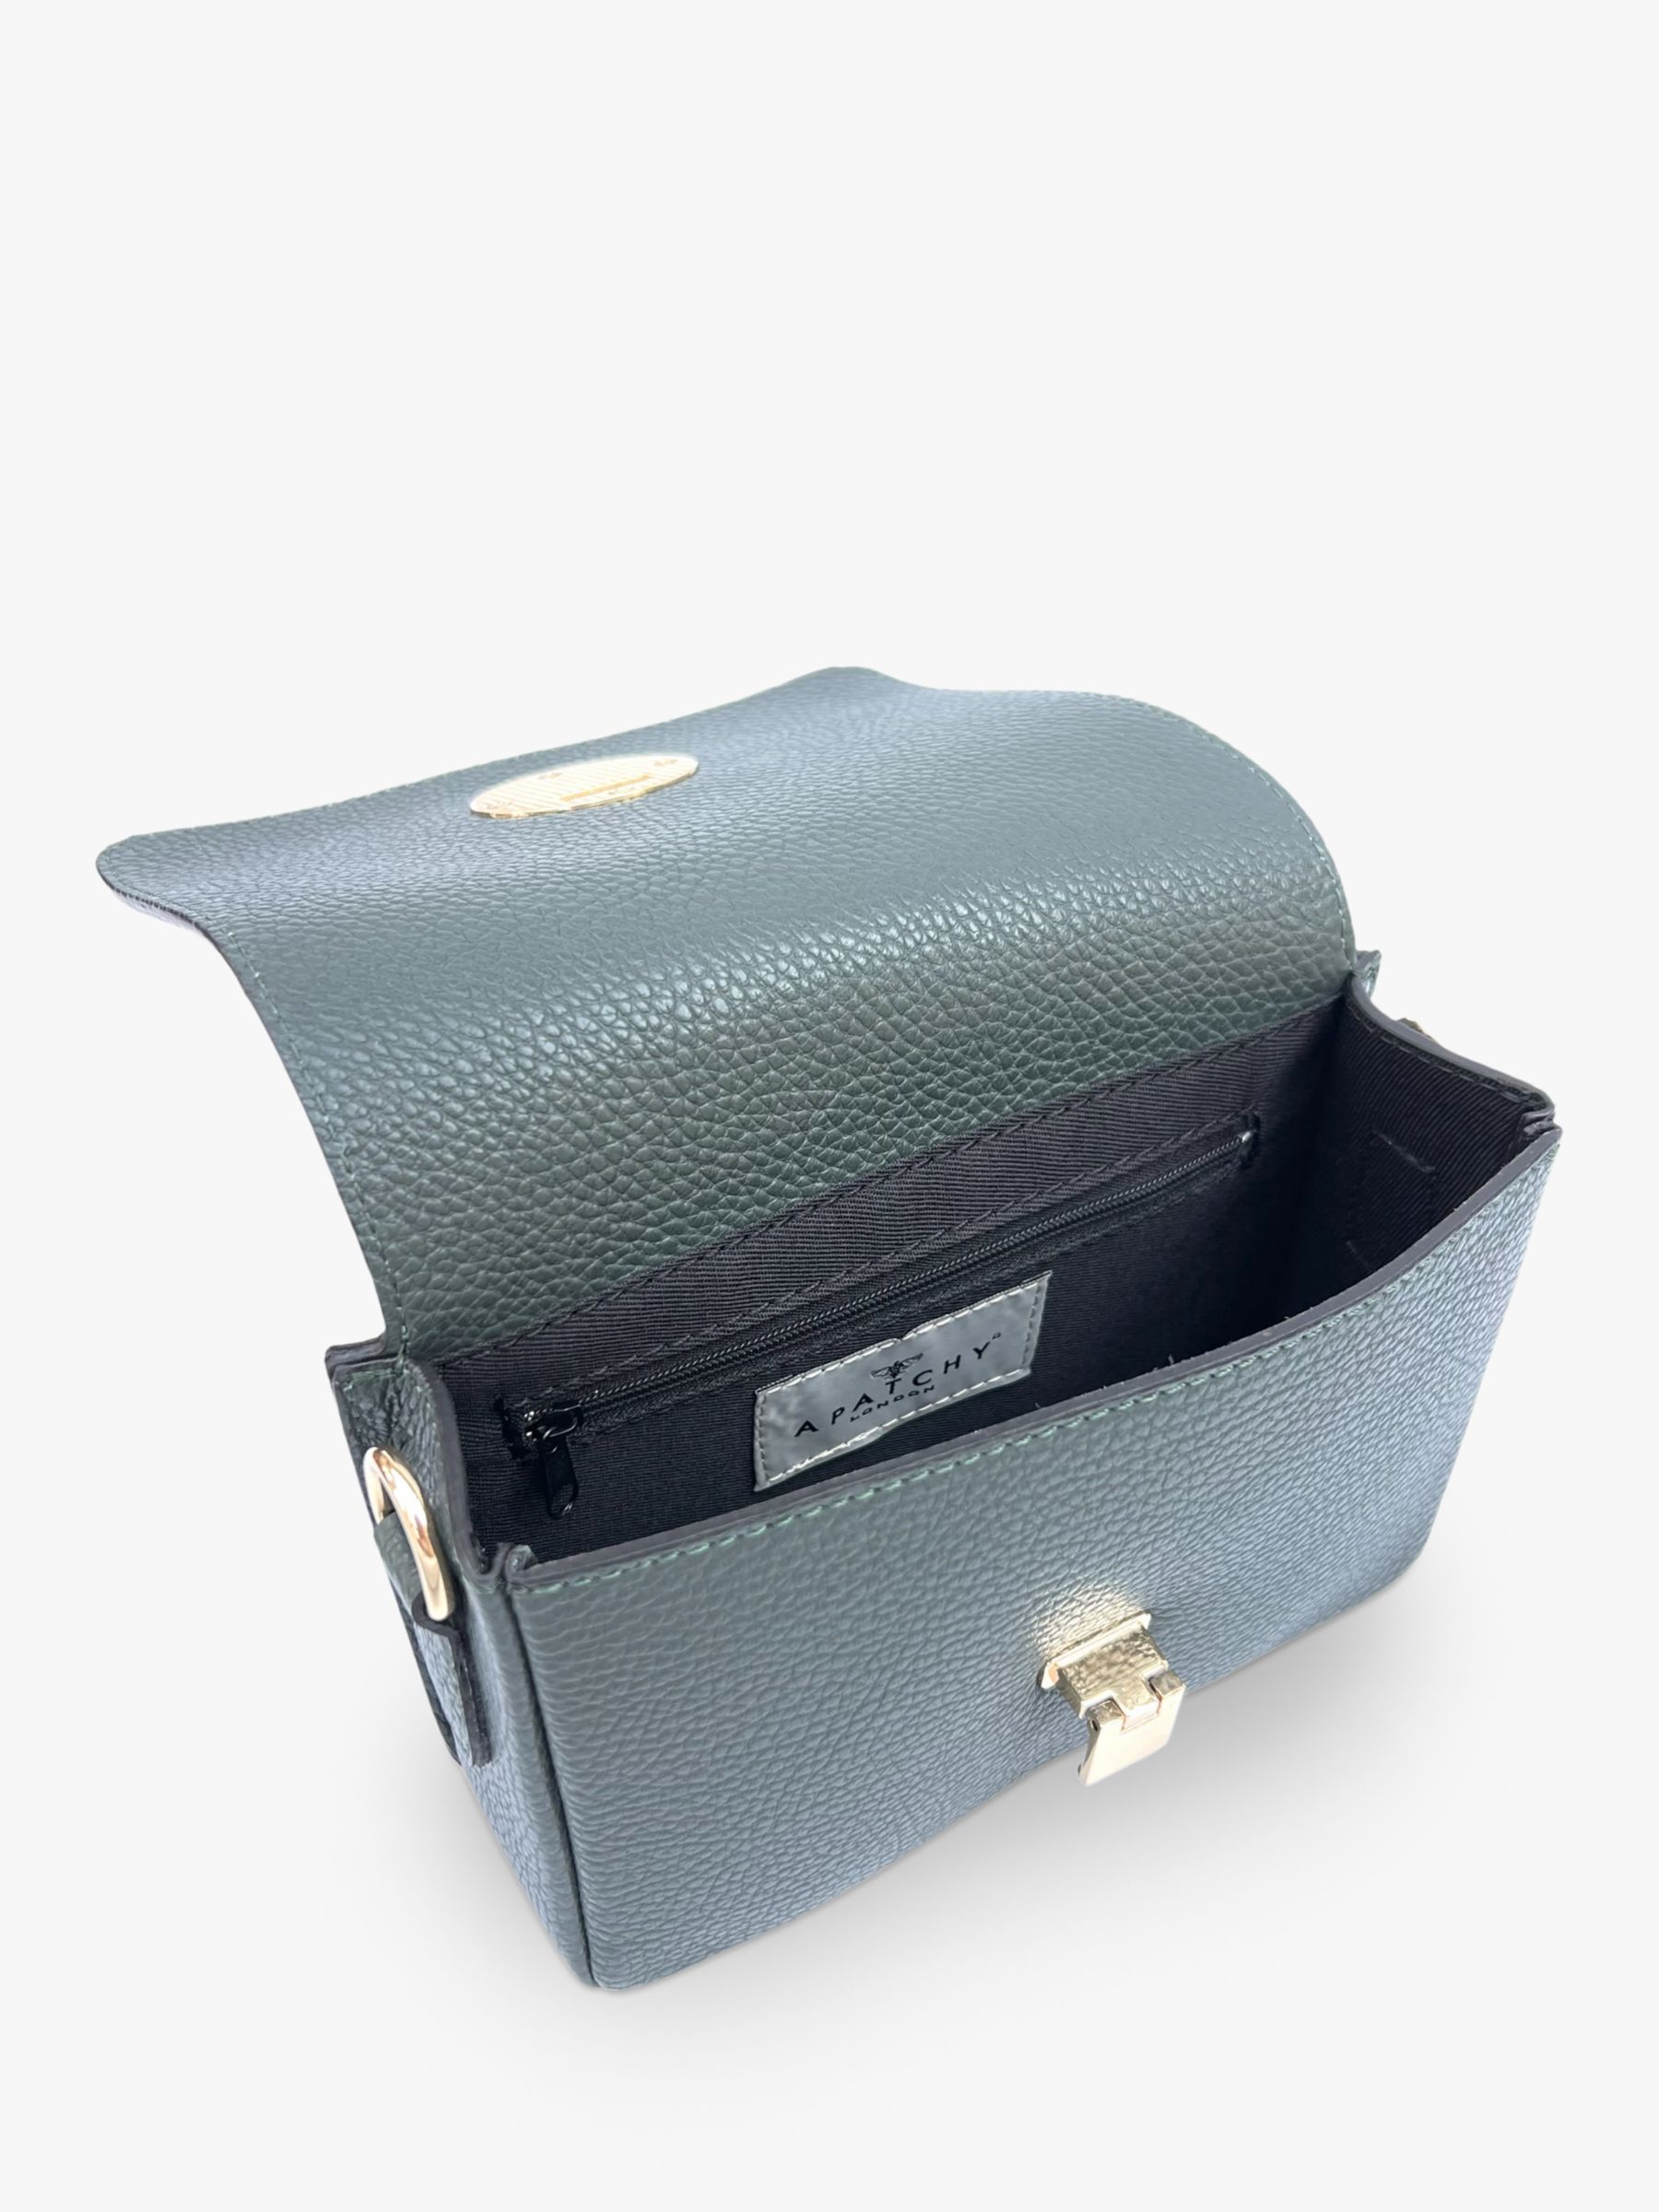 Buy Apatchy The Newbury Leather Crossbody Bag Online at johnlewis.com